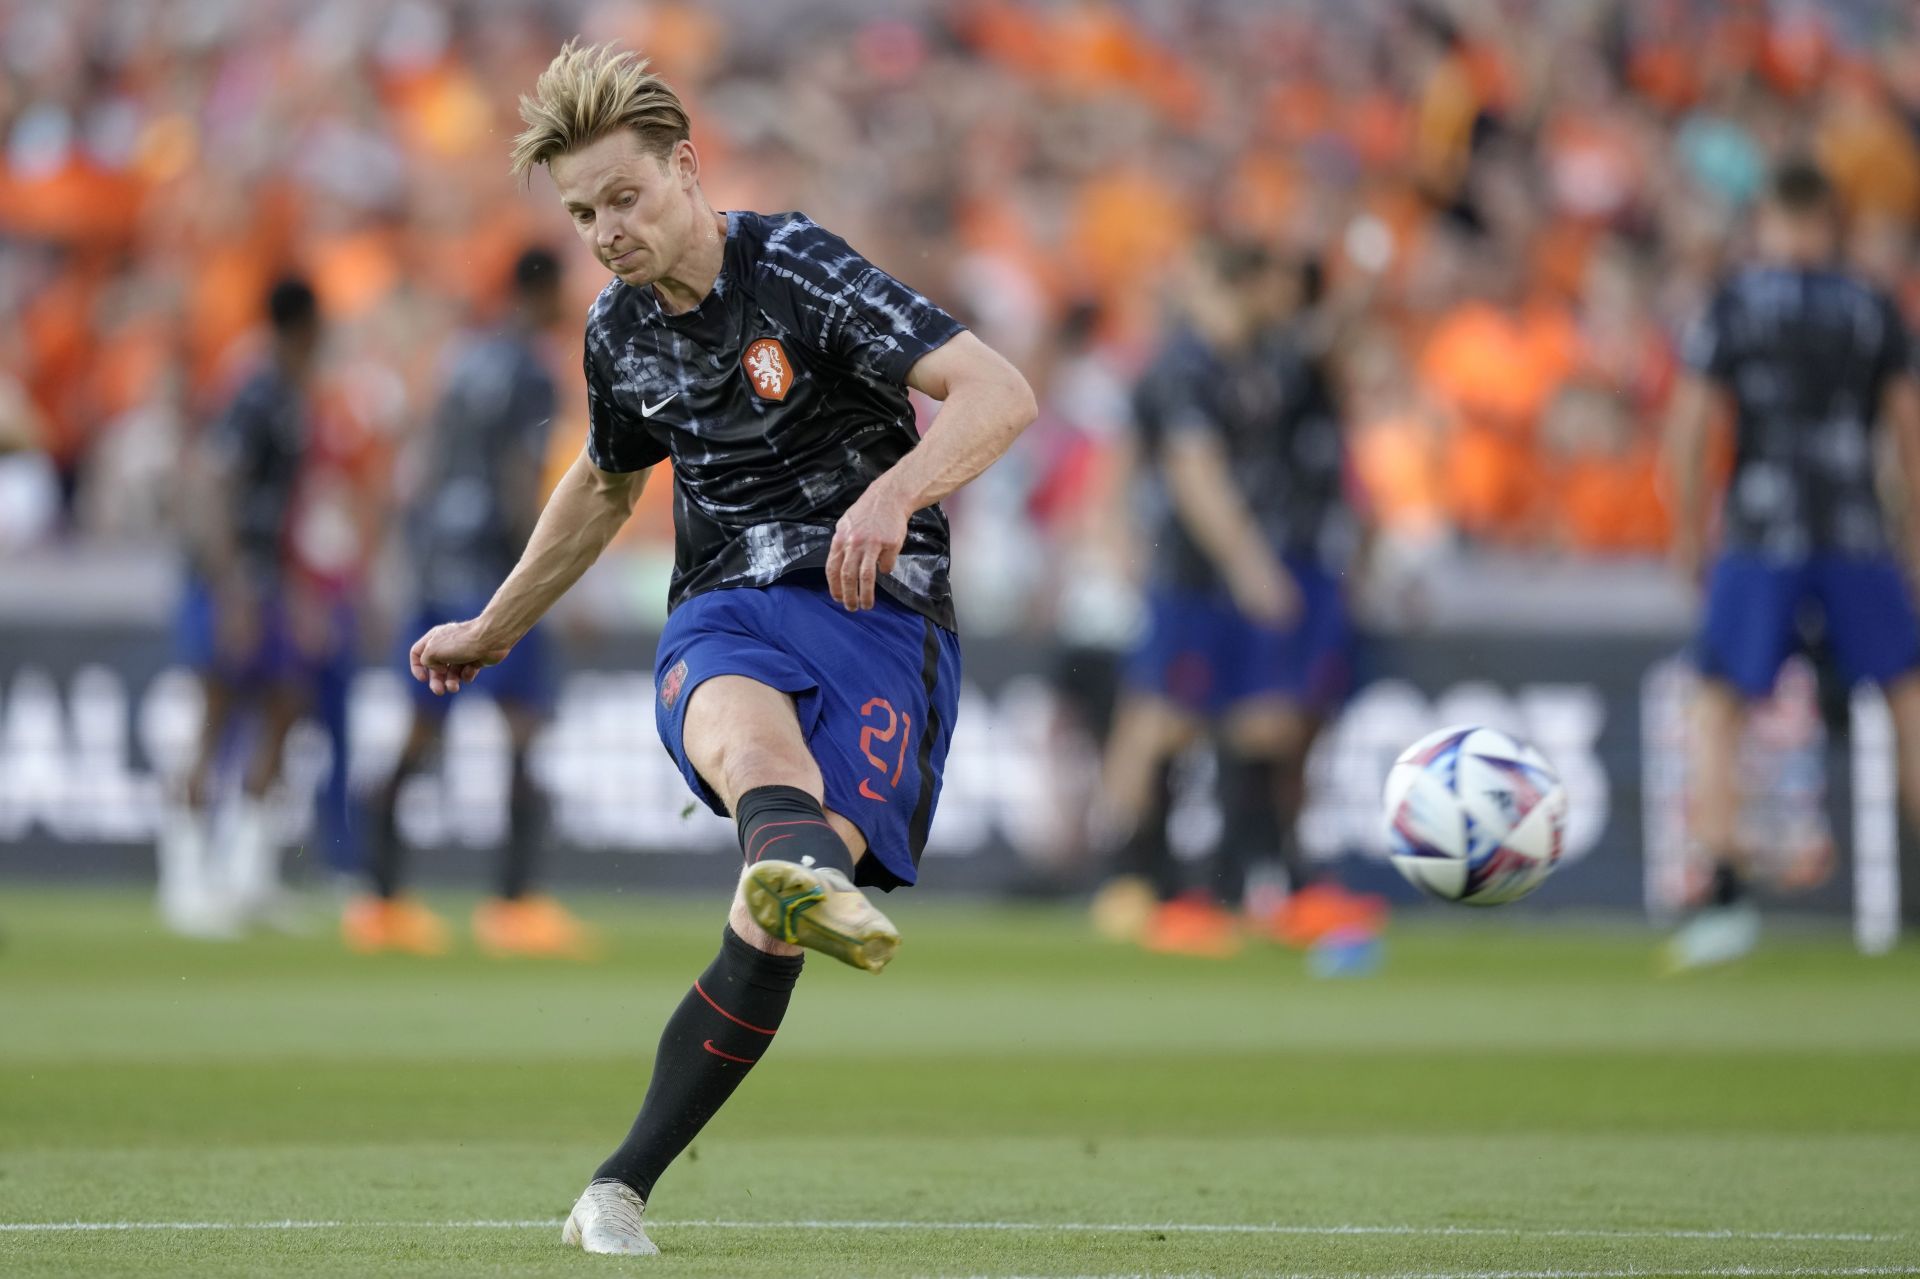 de Jong was close to moving to Manchester United last season.